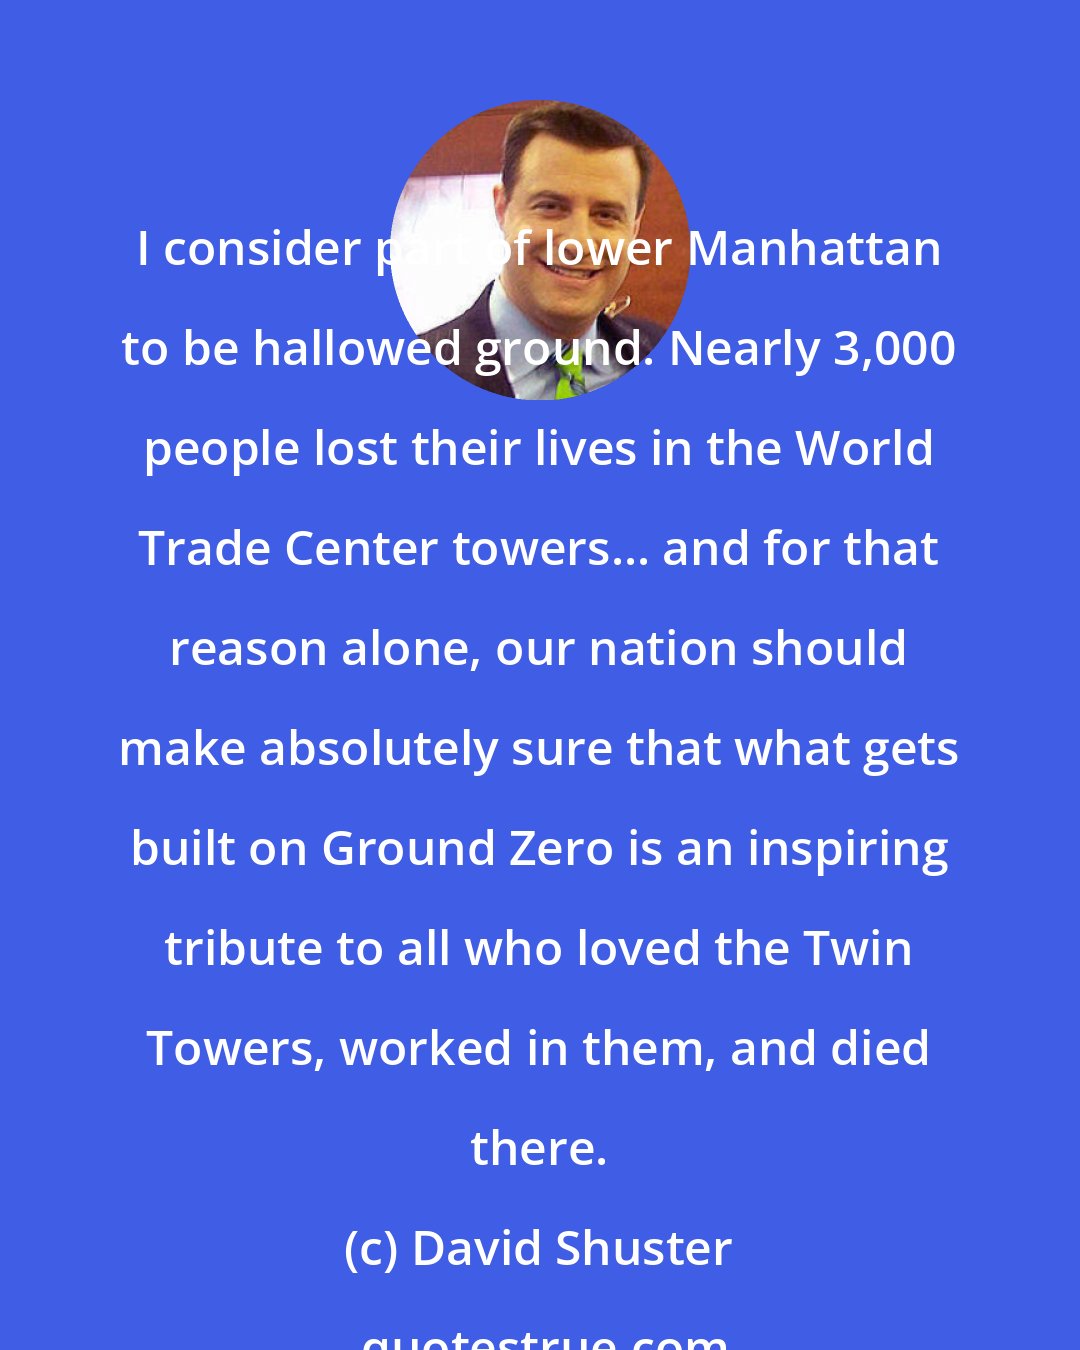 David Shuster: I consider part of lower Manhattan to be hallowed ground. Nearly 3,000 people lost their lives in the World Trade Center towers... and for that reason alone, our nation should make absolutely sure that what gets built on Ground Zero is an inspiring tribute to all who loved the Twin Towers, worked in them, and died there.